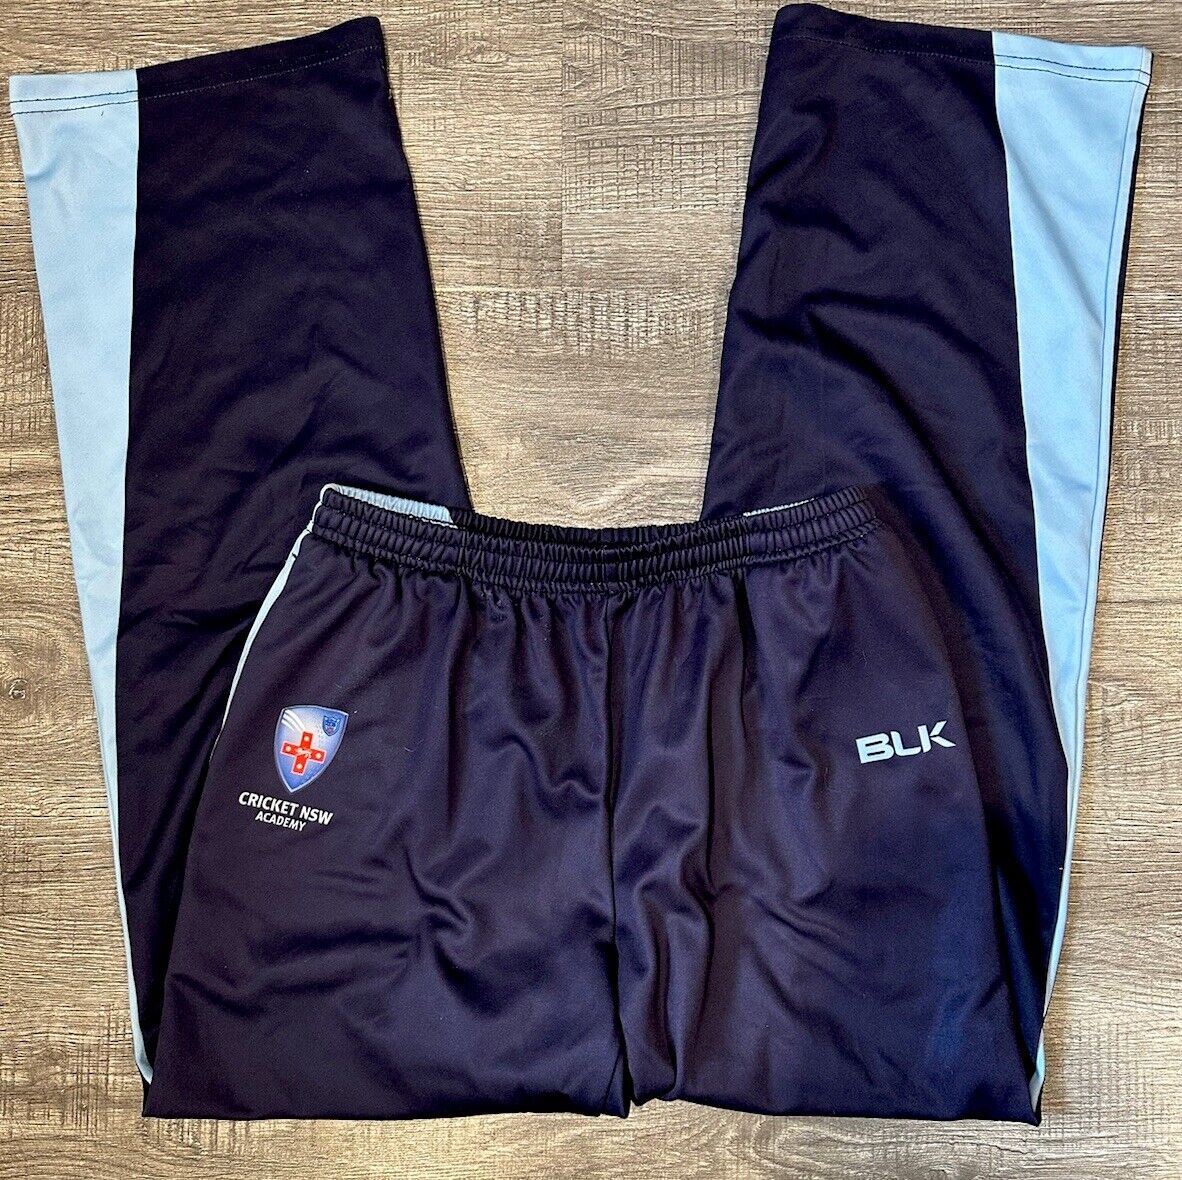 CRICKET NSW ACADEMY PLAYER ISSUED TRAINING PANTS BLK MEDIUM BBL ODI STATE